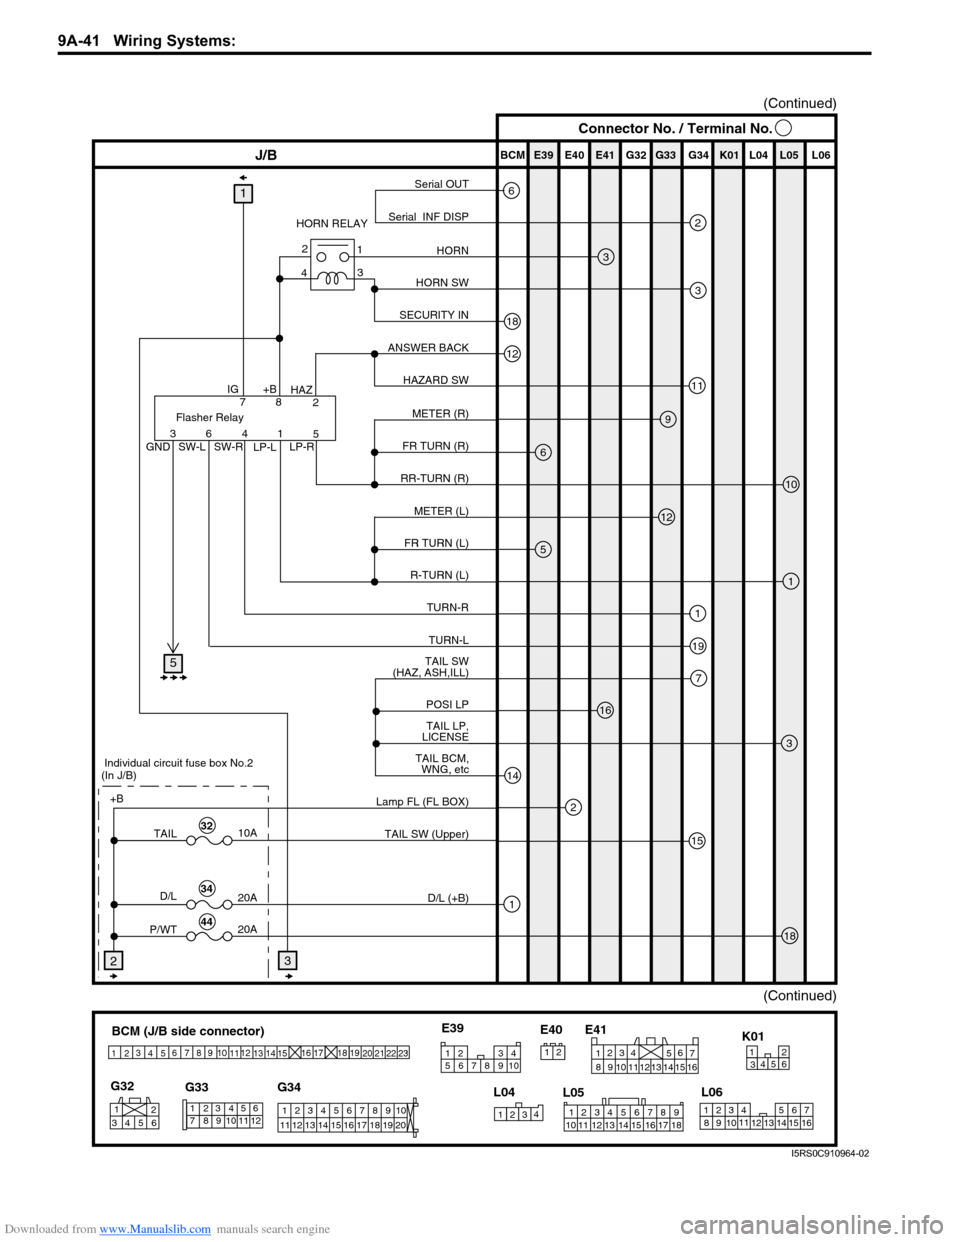 SUZUKI SWIFT 2005 2.G Service Workshop Manual Downloaded from www.Manualslib.com manuals search engine 9A-41 Wiring Systems: 
BCM (J/B side connector)
34
1
2 5
15
14
12
13
10
11
9
8
6
7
17
161821 22
19
20
23
1234578 11 6
12
91034 6 52
1
G33
G32
G